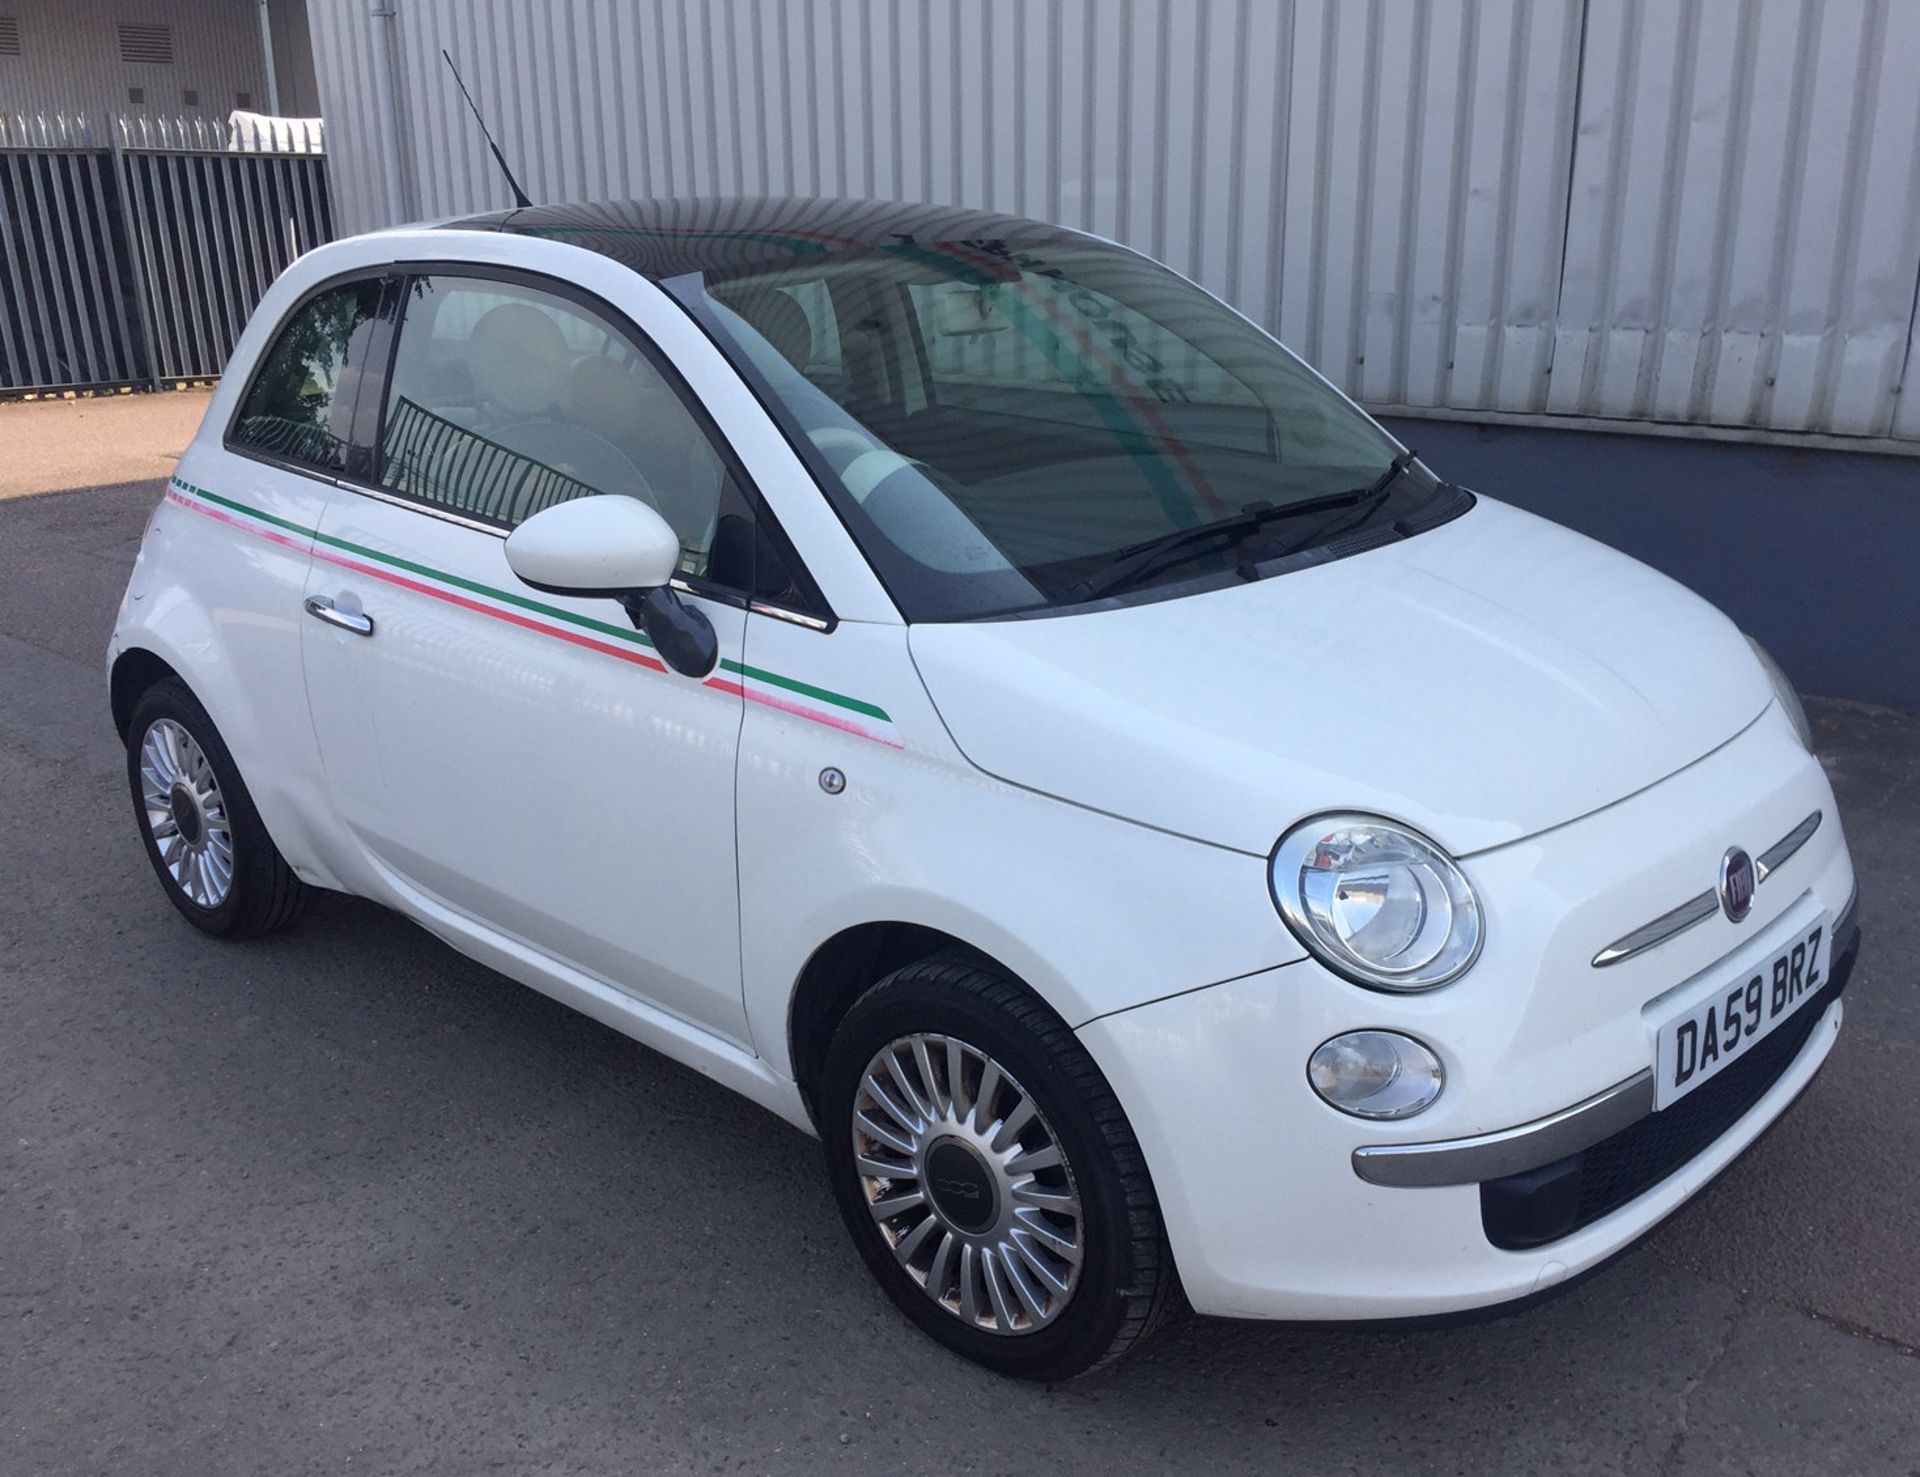 2009 Fiat 500 1.2 Lounge 3 Dr Hatchback - CL505 - NO VAT ON THE HAMMER - Location: Corby, Northampto